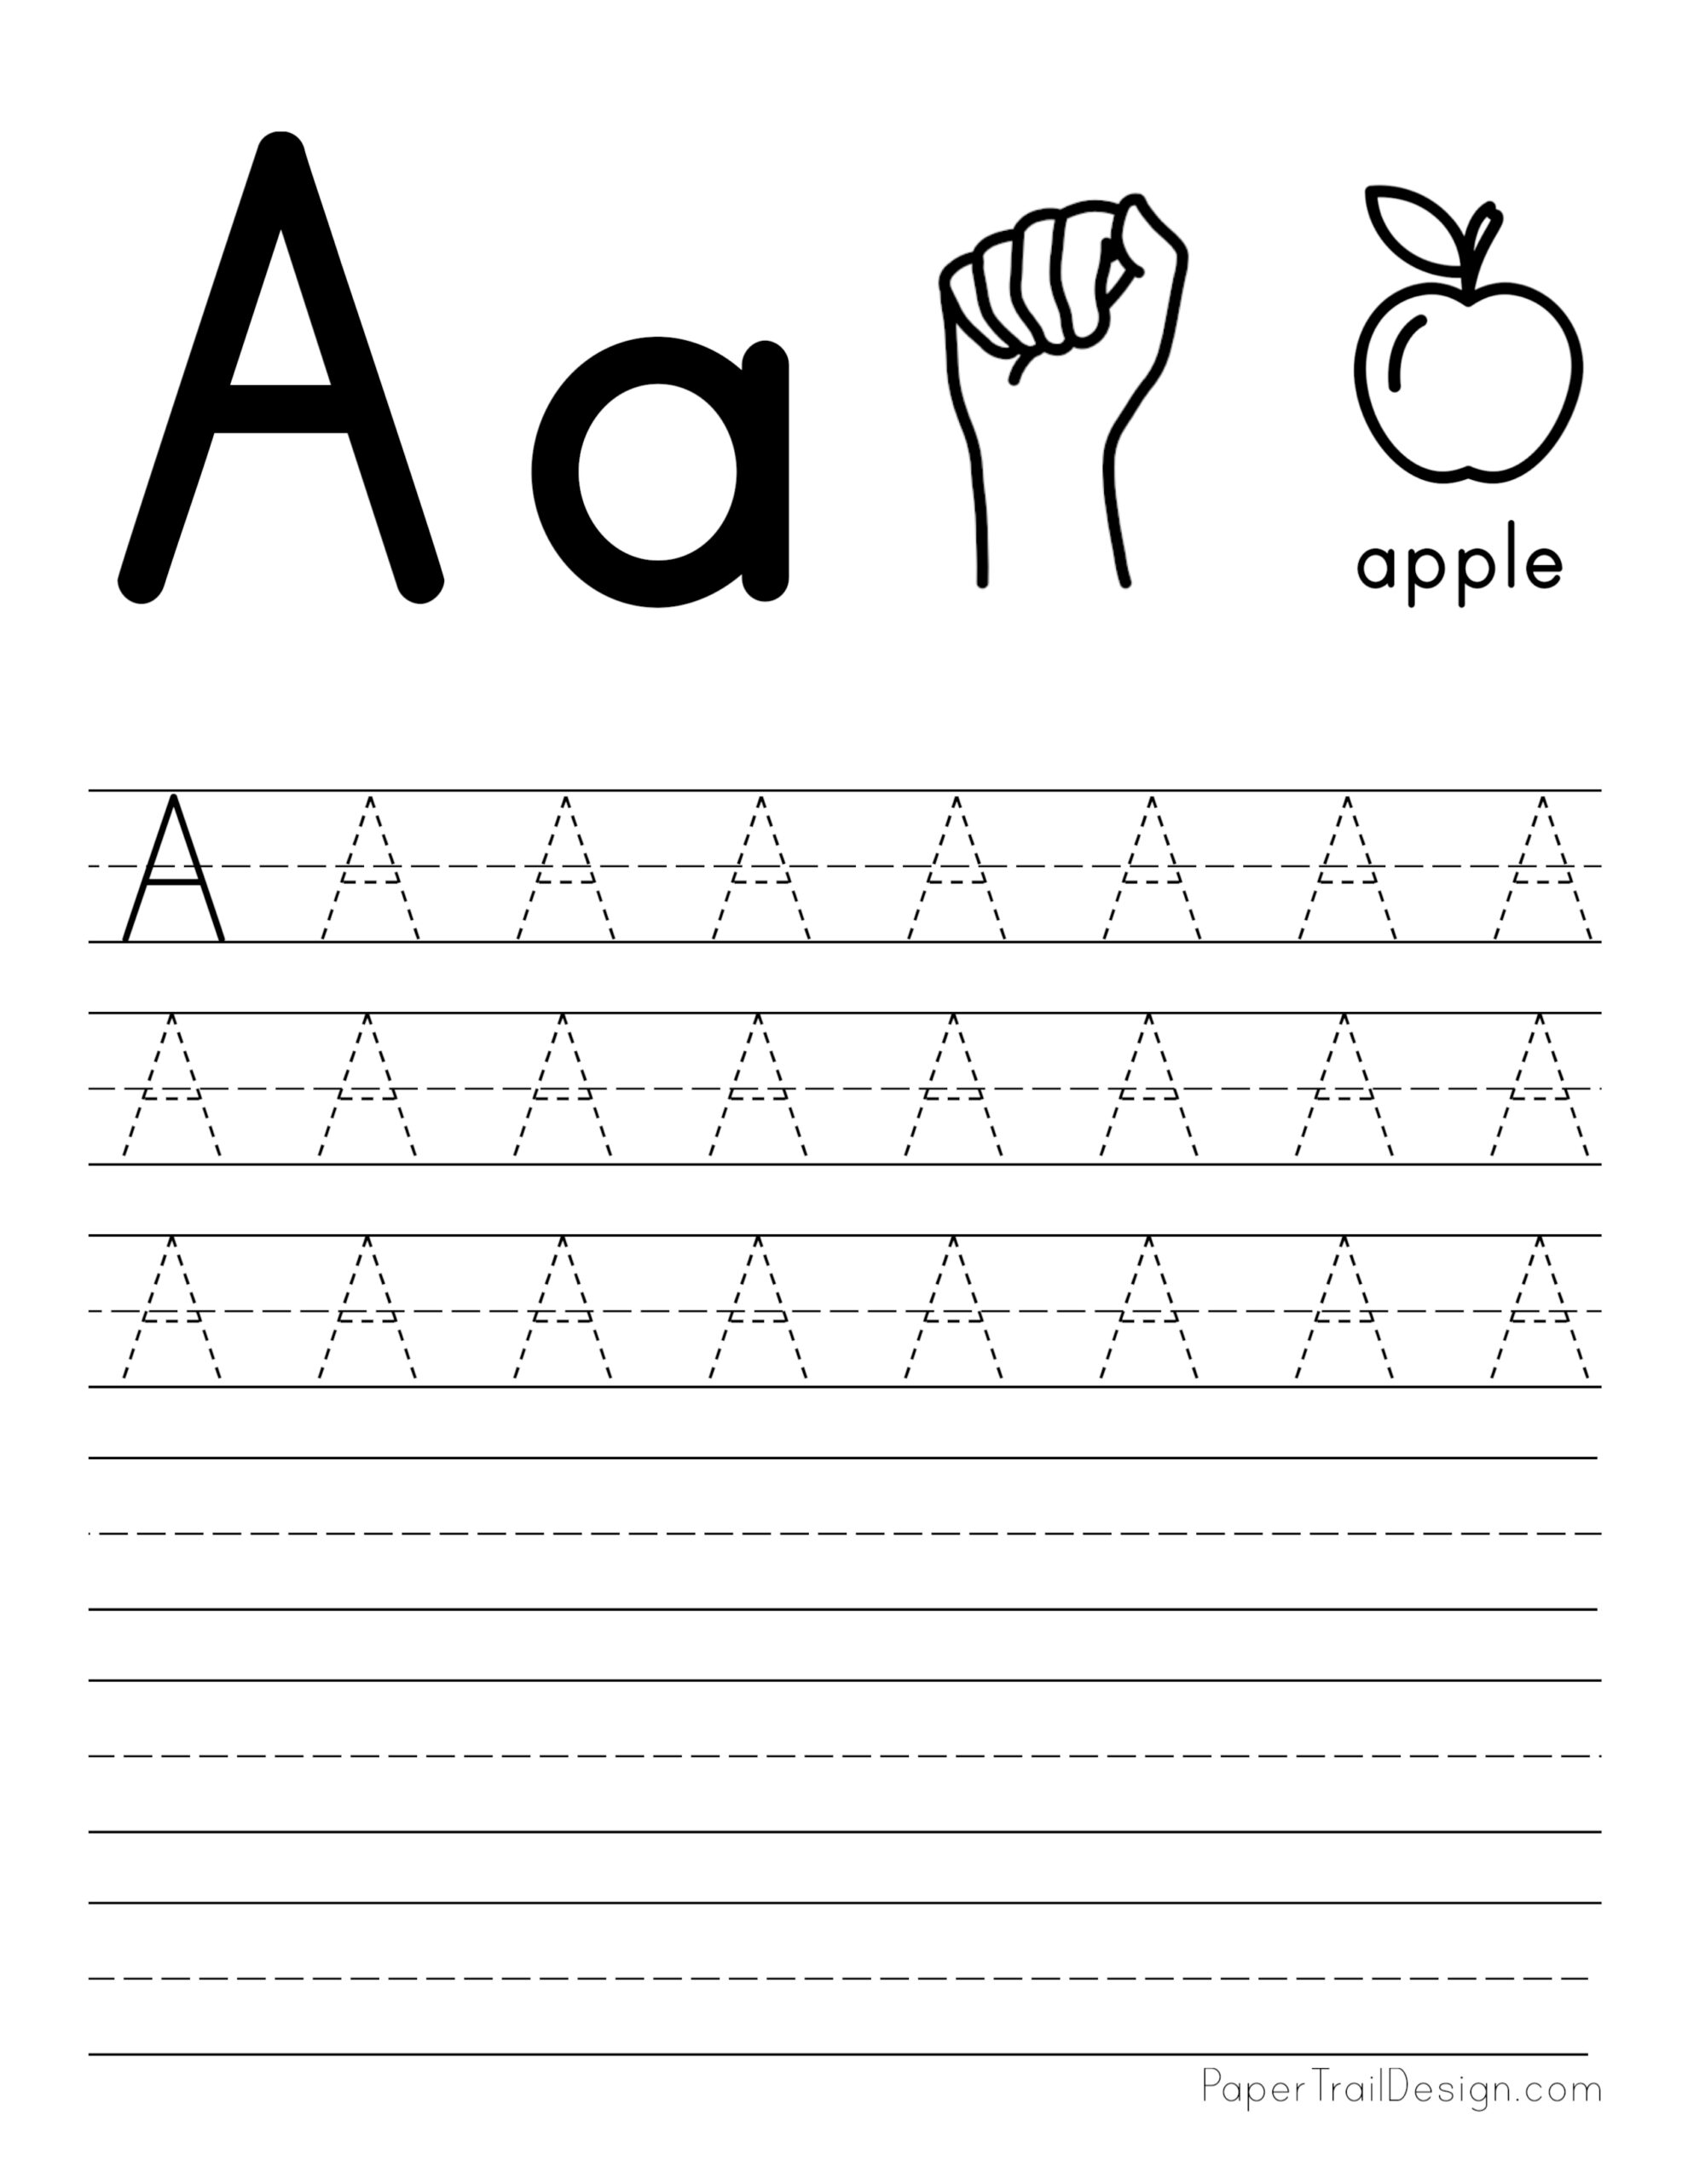 31 Creative Letter Tracing Worksheets 22